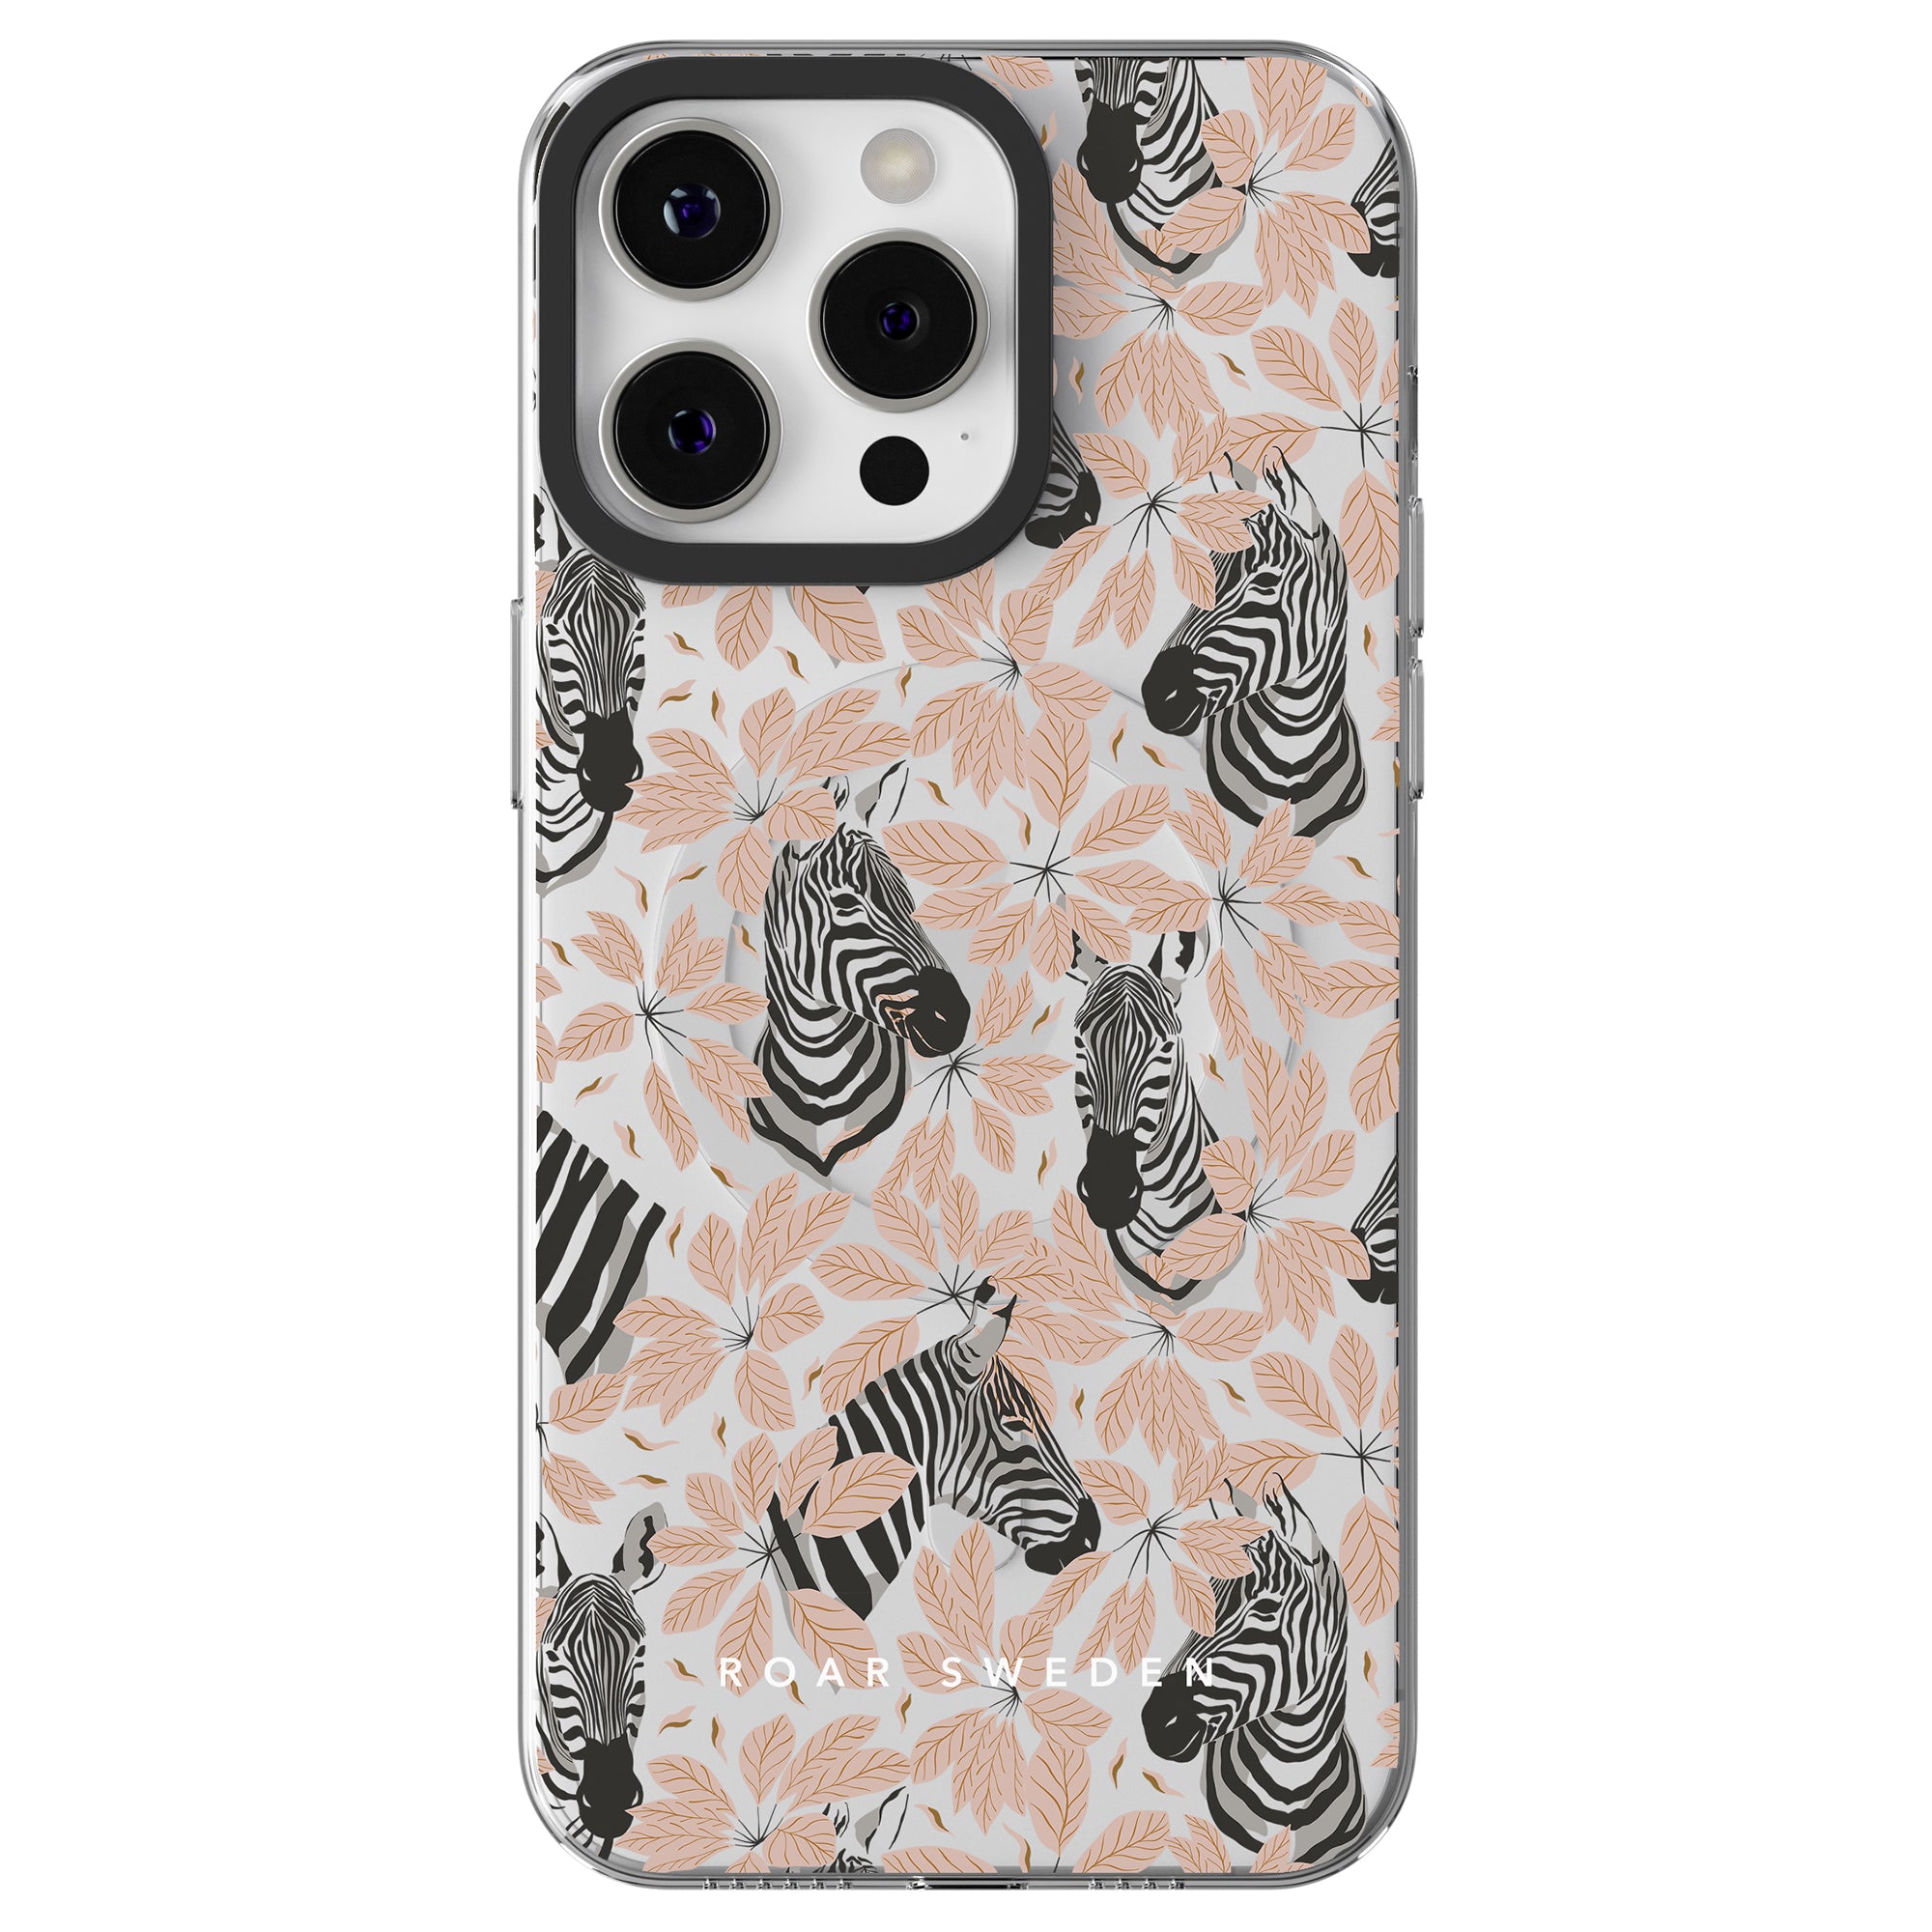 A smartphone with a Toto - MagSafe featuring a zebra and floral pattern, showcasing various zebras among beige leaves. Part of the Zebra Collection, the robust skydd has "Roar Sweden" printed at the bottom.